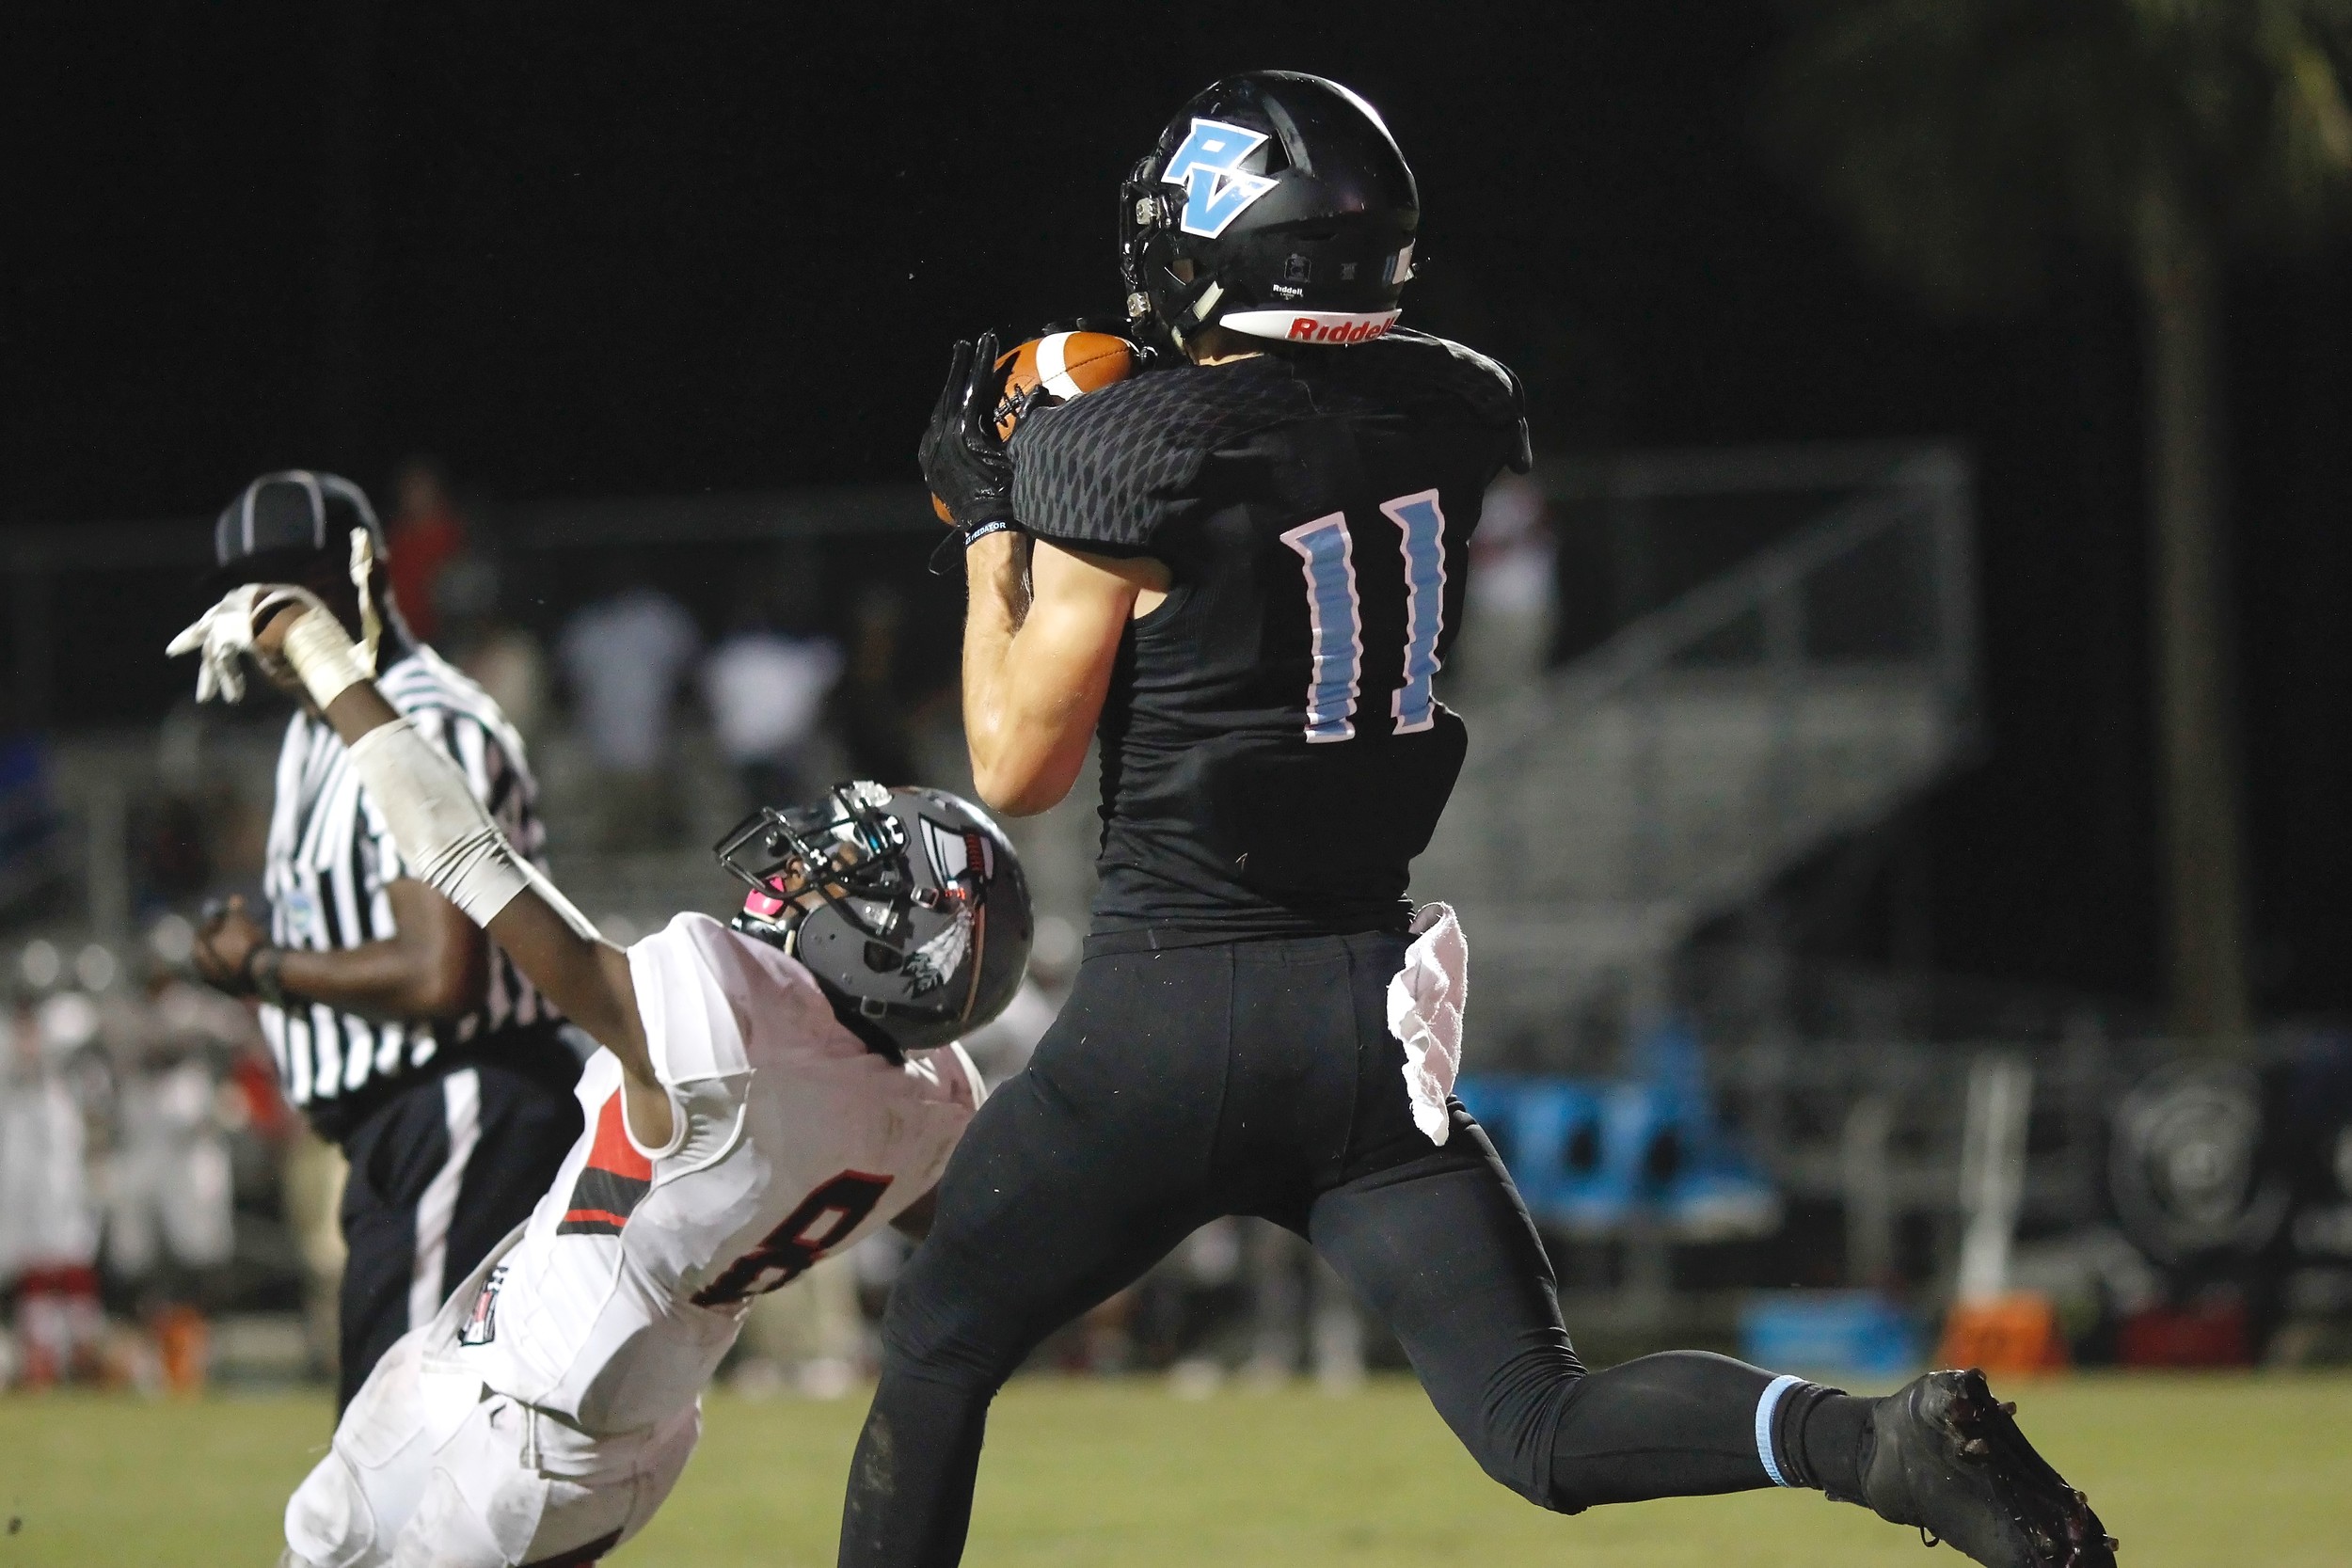 Ponte Vedra’s #11 Kit Connelly catches a Nick Tronti pass for a touchdown.